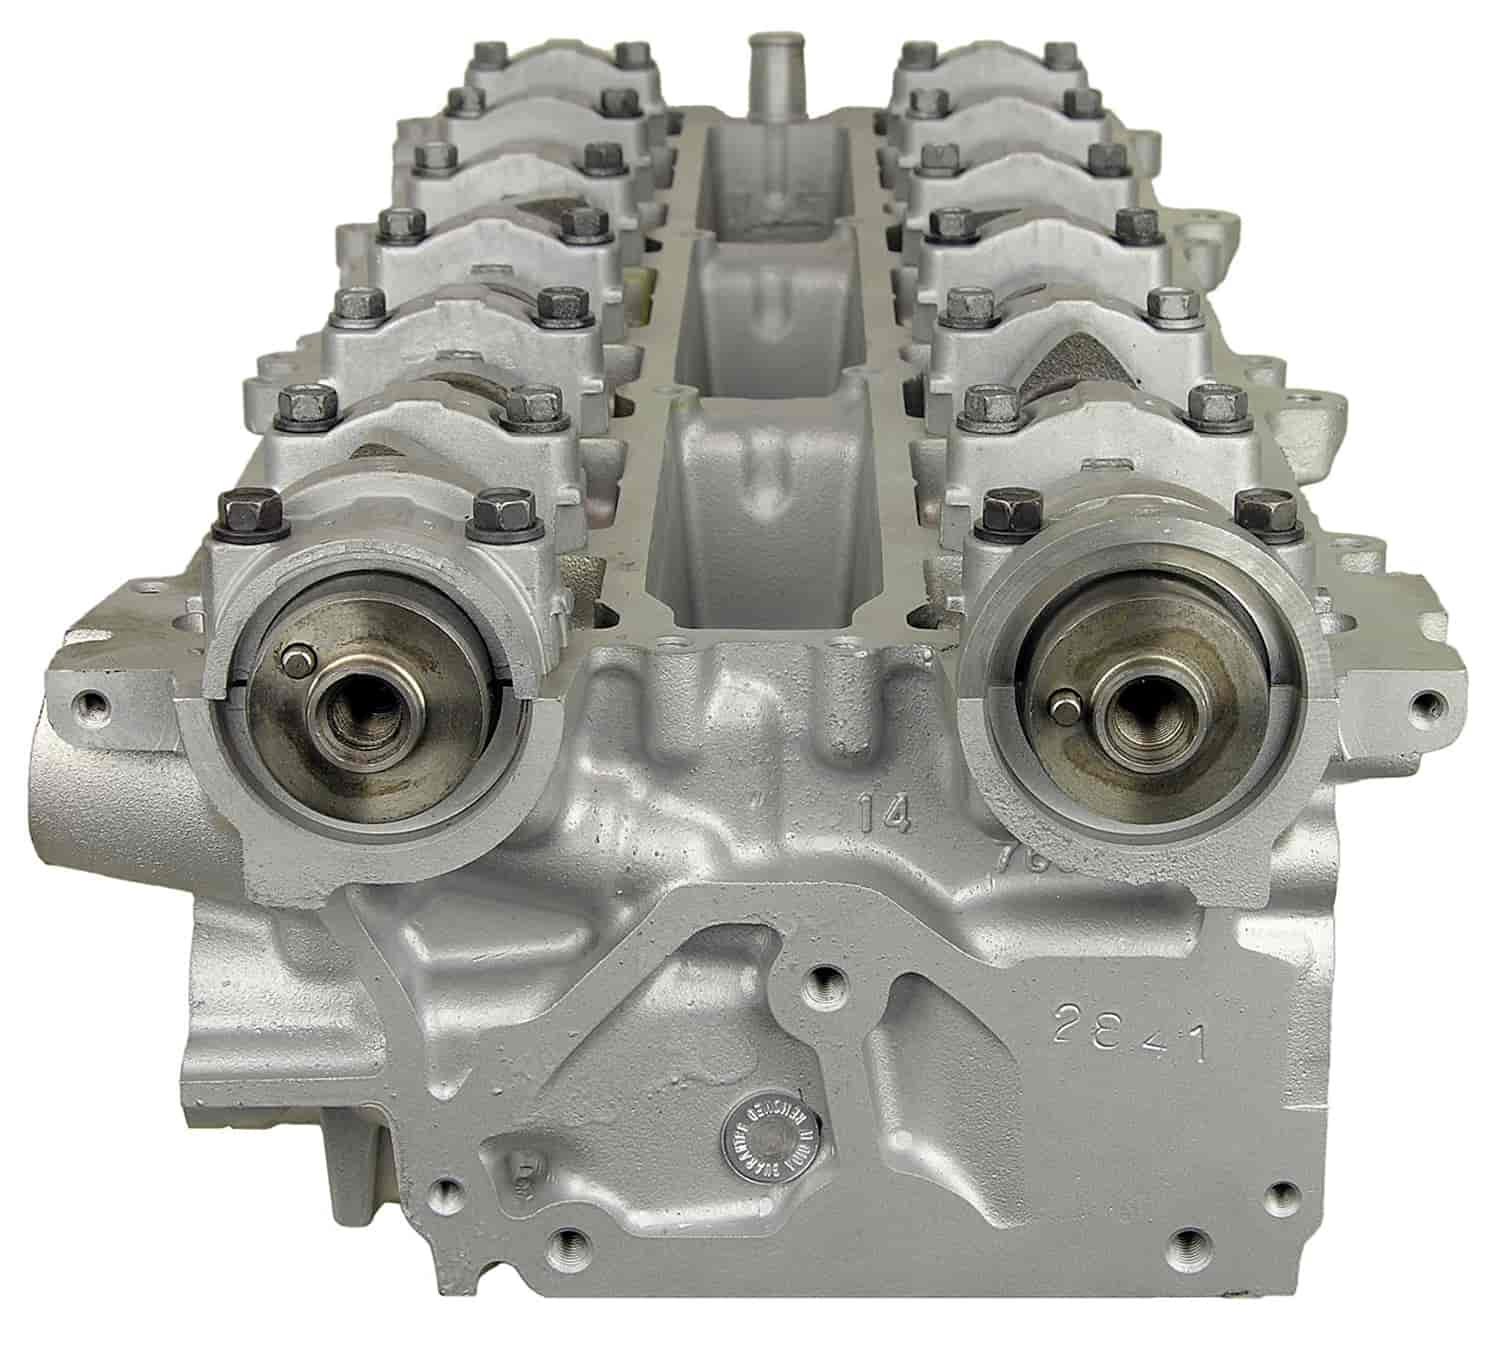 Remanufactured Cylinder Head for 1992-1997 Toyota/Lexus with 3.0L L6 2JZGE